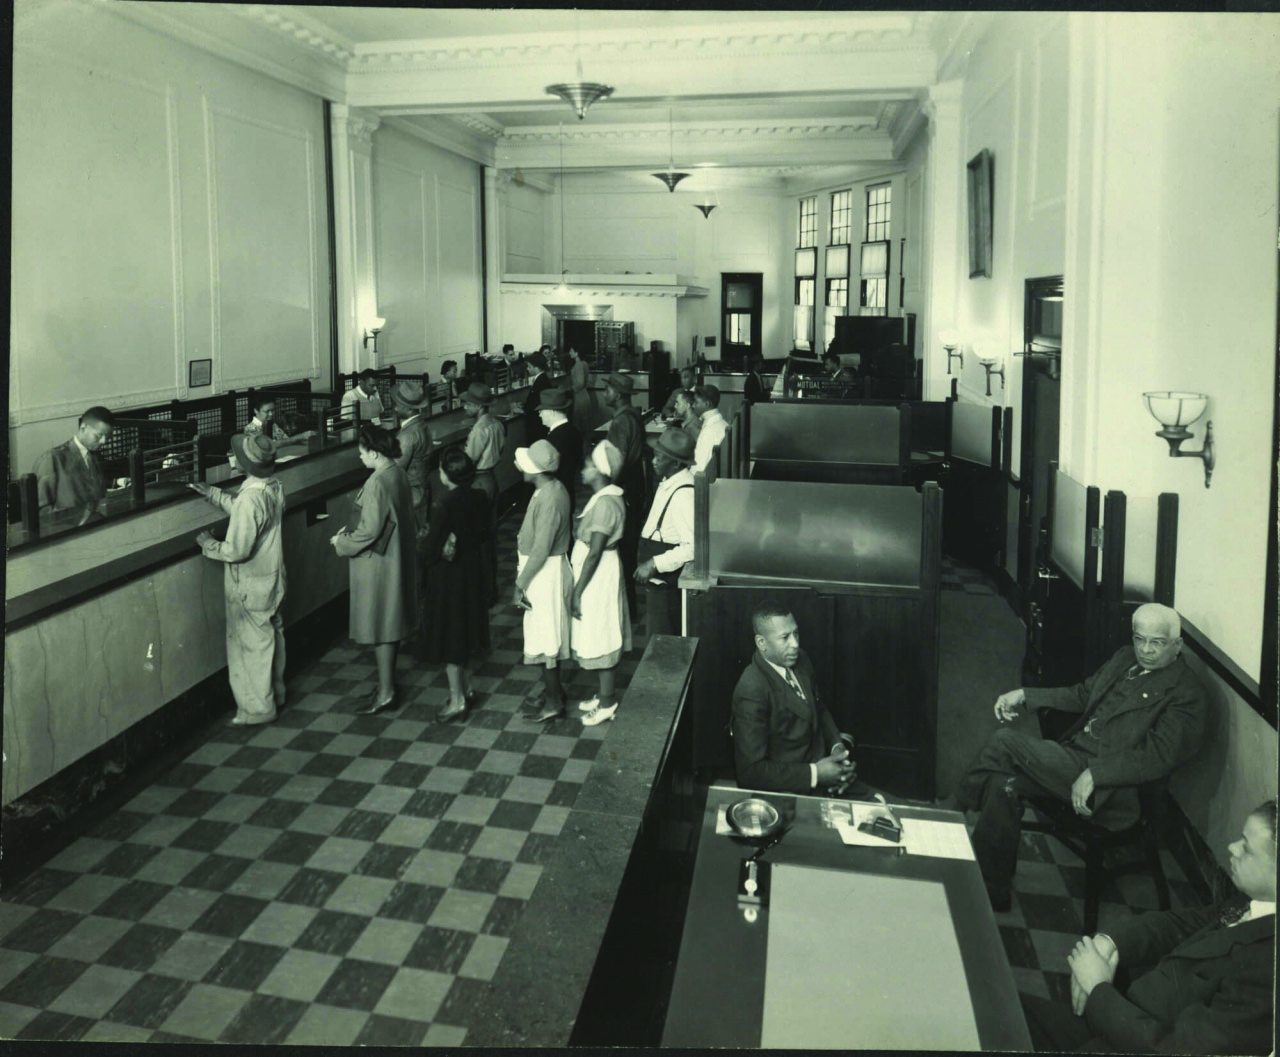 Interior of Mechanics & Farmers Bank 1930s. You can see the presence and distinctive clothing of Black farmers, laborers, domestic workers, and the middle-class professionals. Courtesy North Carolina Mutual Life Insurance Company Archives, David M. Rubenstein Rare Book & Manuscript Library, Duke University, and University Archives, Records and History Center, North Carolina Central University